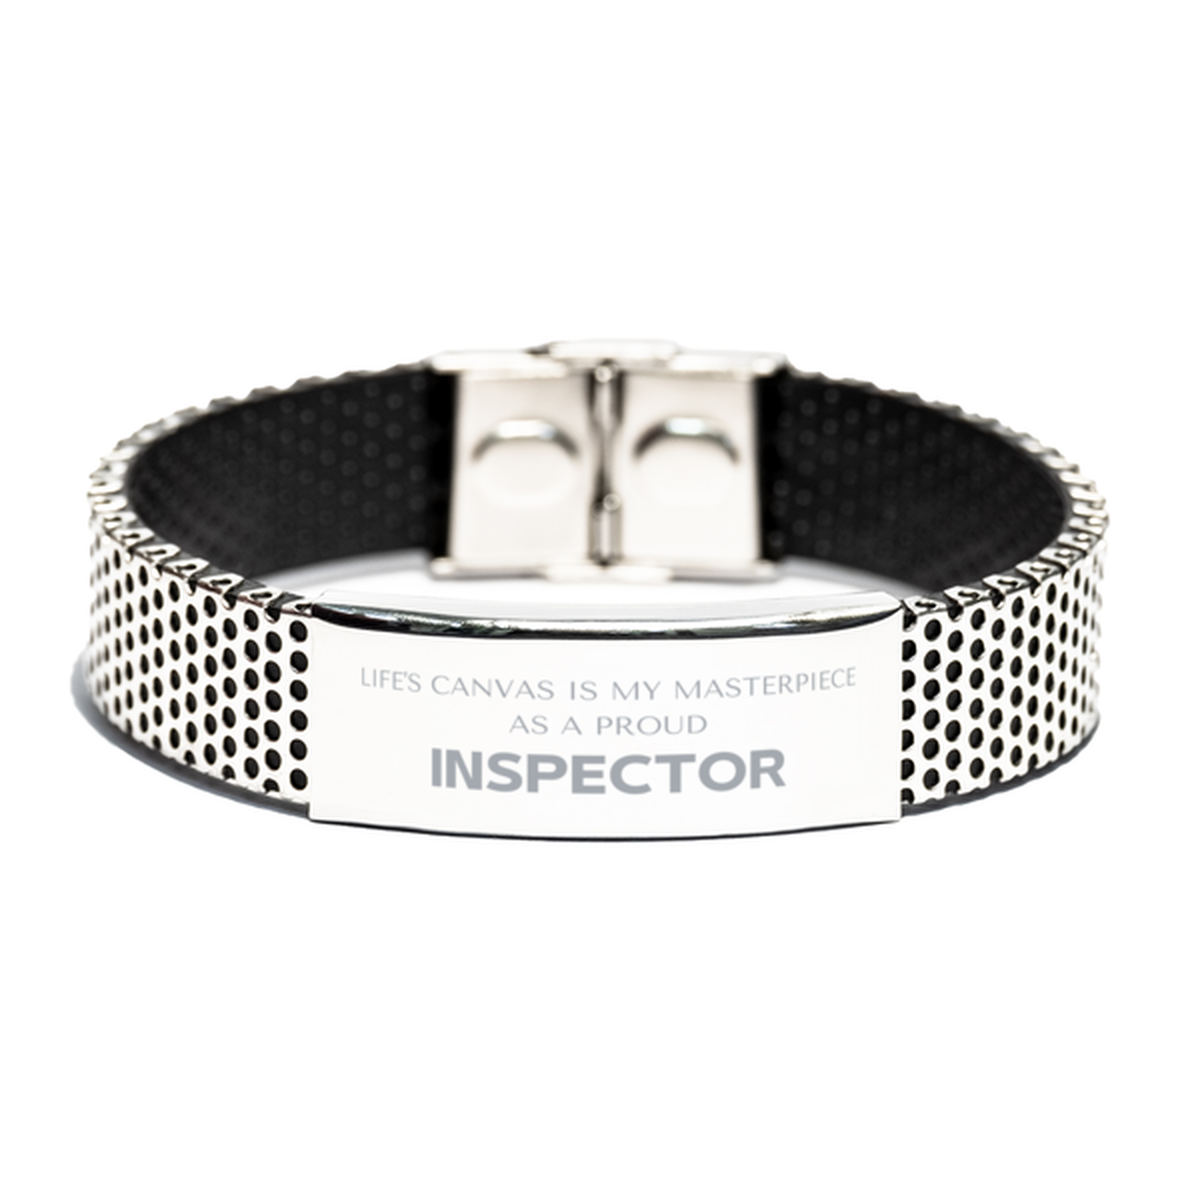 Proud Inspector Gifts, Life's canvas is my masterpiece, Epic Birthday Christmas Unique Stainless Steel Bracelet For Inspector, Coworkers, Men, Women, Friends